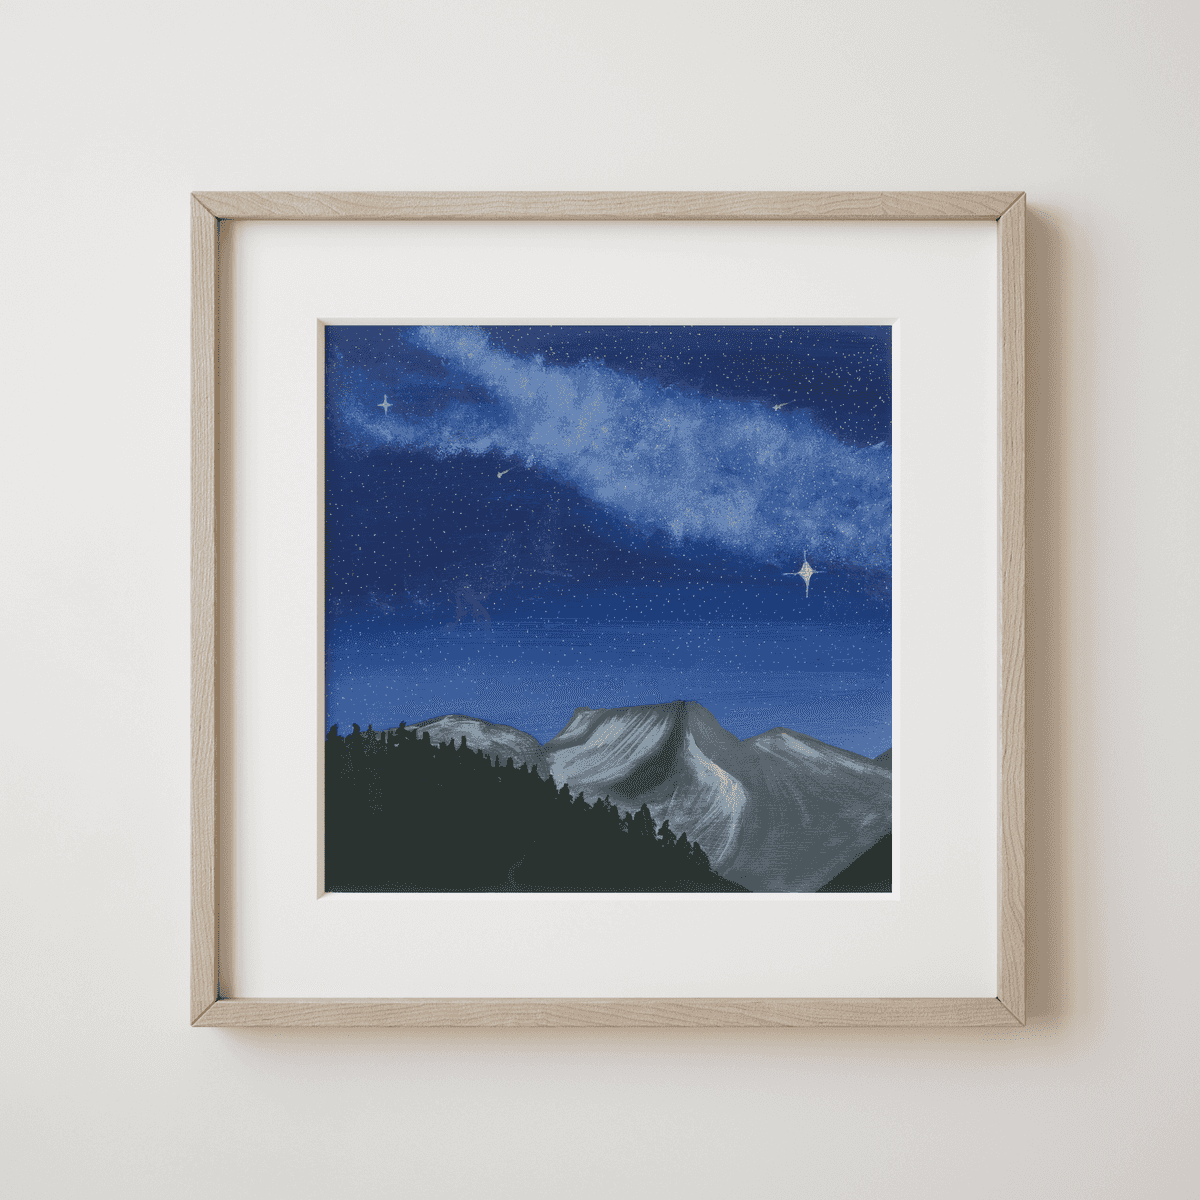 A Night with Grey Wolves - Cosmic Veil over the Silent Mountains and Pine Forest Fine Art Print - earth.fm